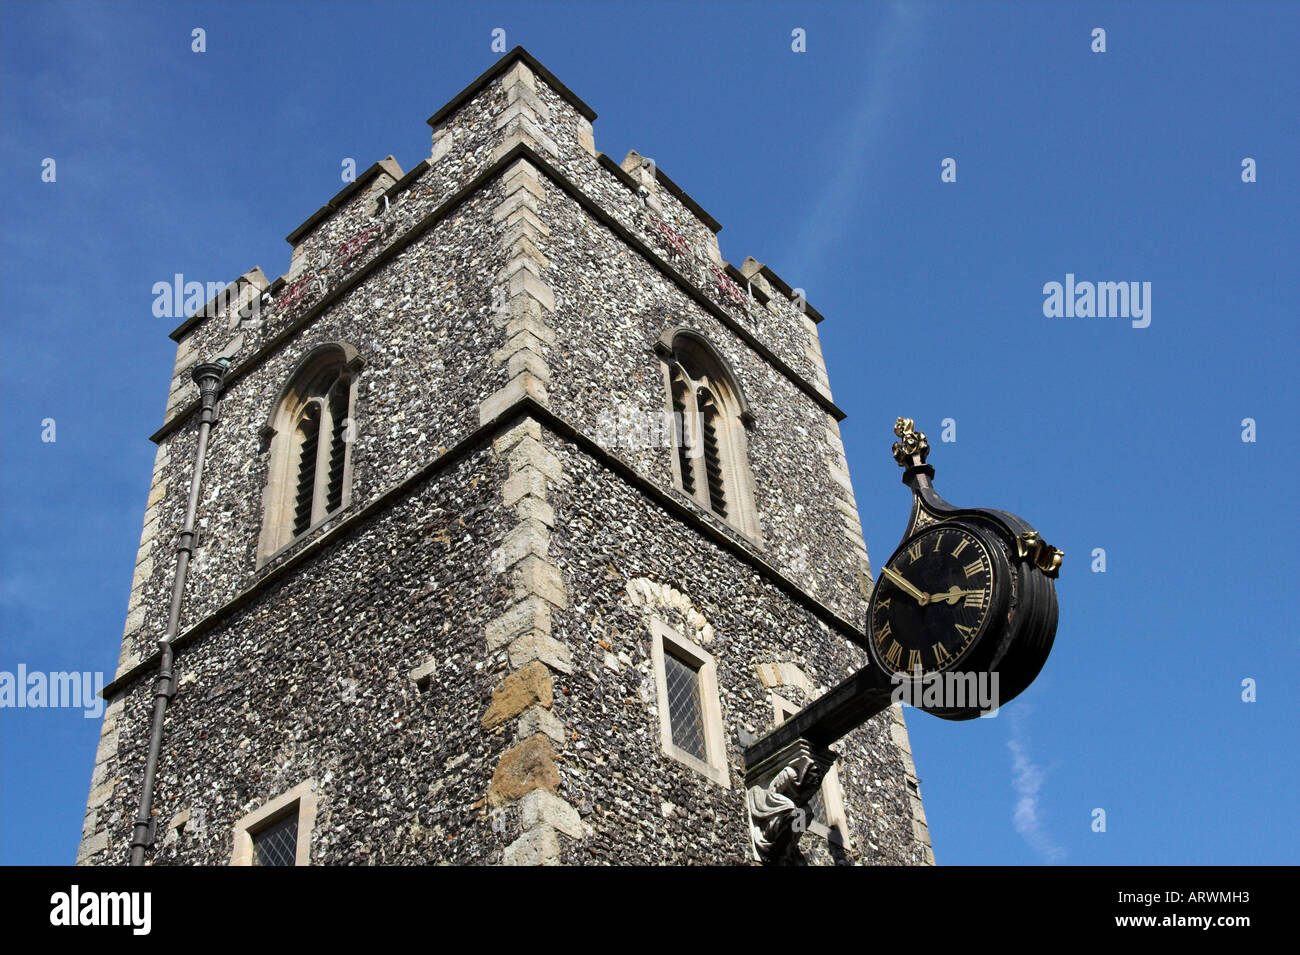 Clocktower Of The Church Of St George The Martyr In Canterbury In Kent In England Stock Photo